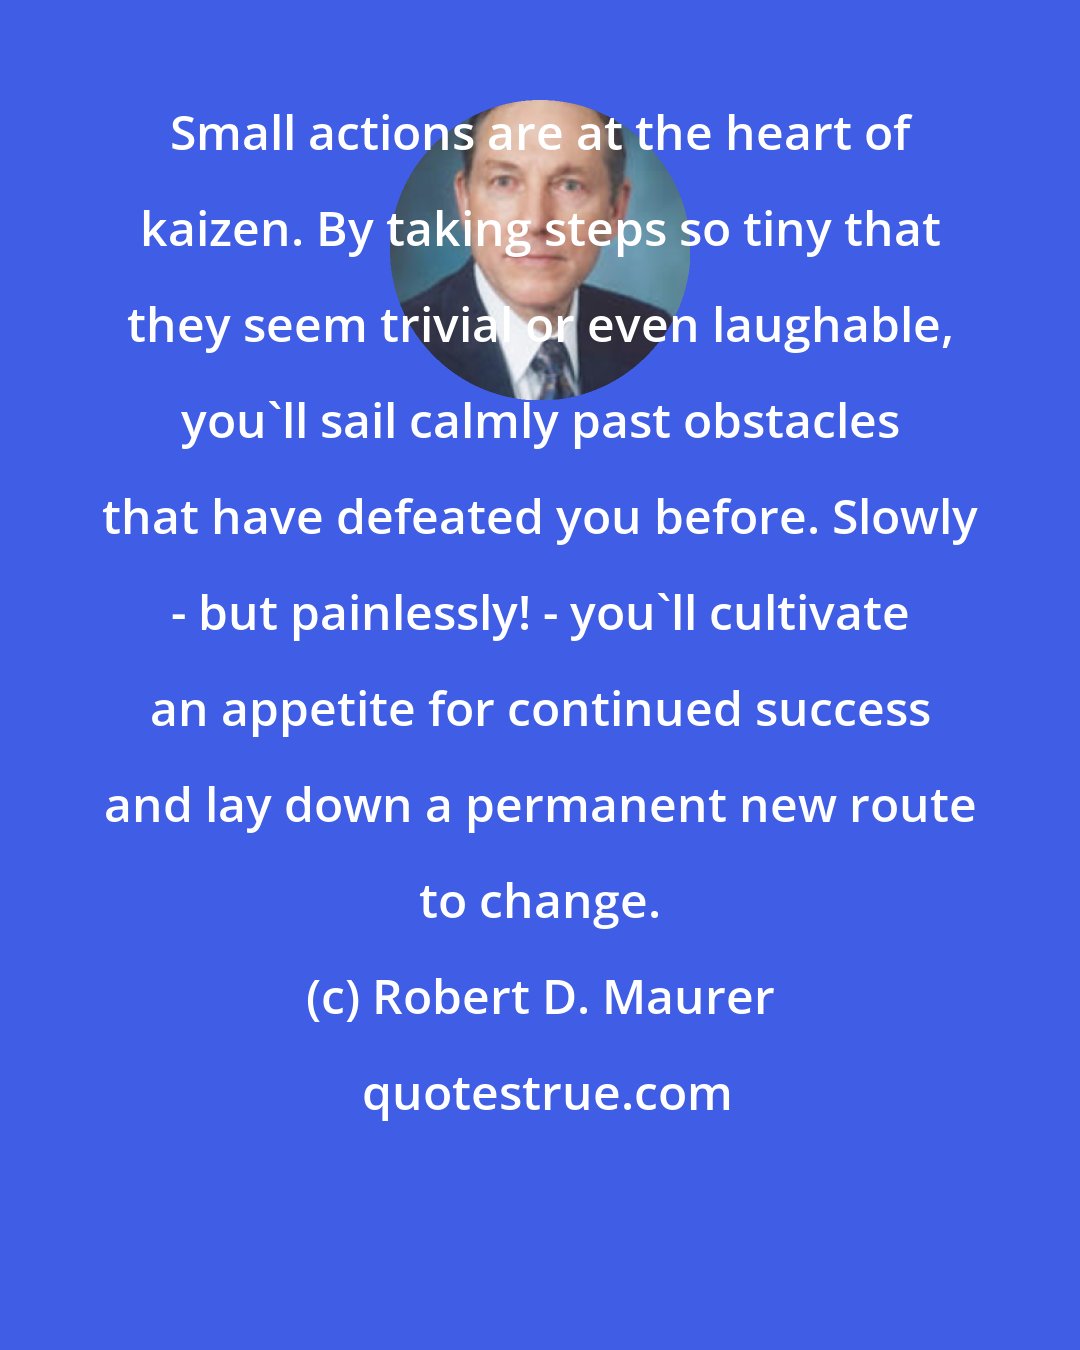 Robert D. Maurer: Small actions are at the heart of kaizen. By taking steps so tiny that they seem trivial or even laughable, you'll sail calmly past obstacles that have defeated you before. Slowly - but painlessly! - you'll cultivate an appetite for continued success and lay down a permanent new route to change.